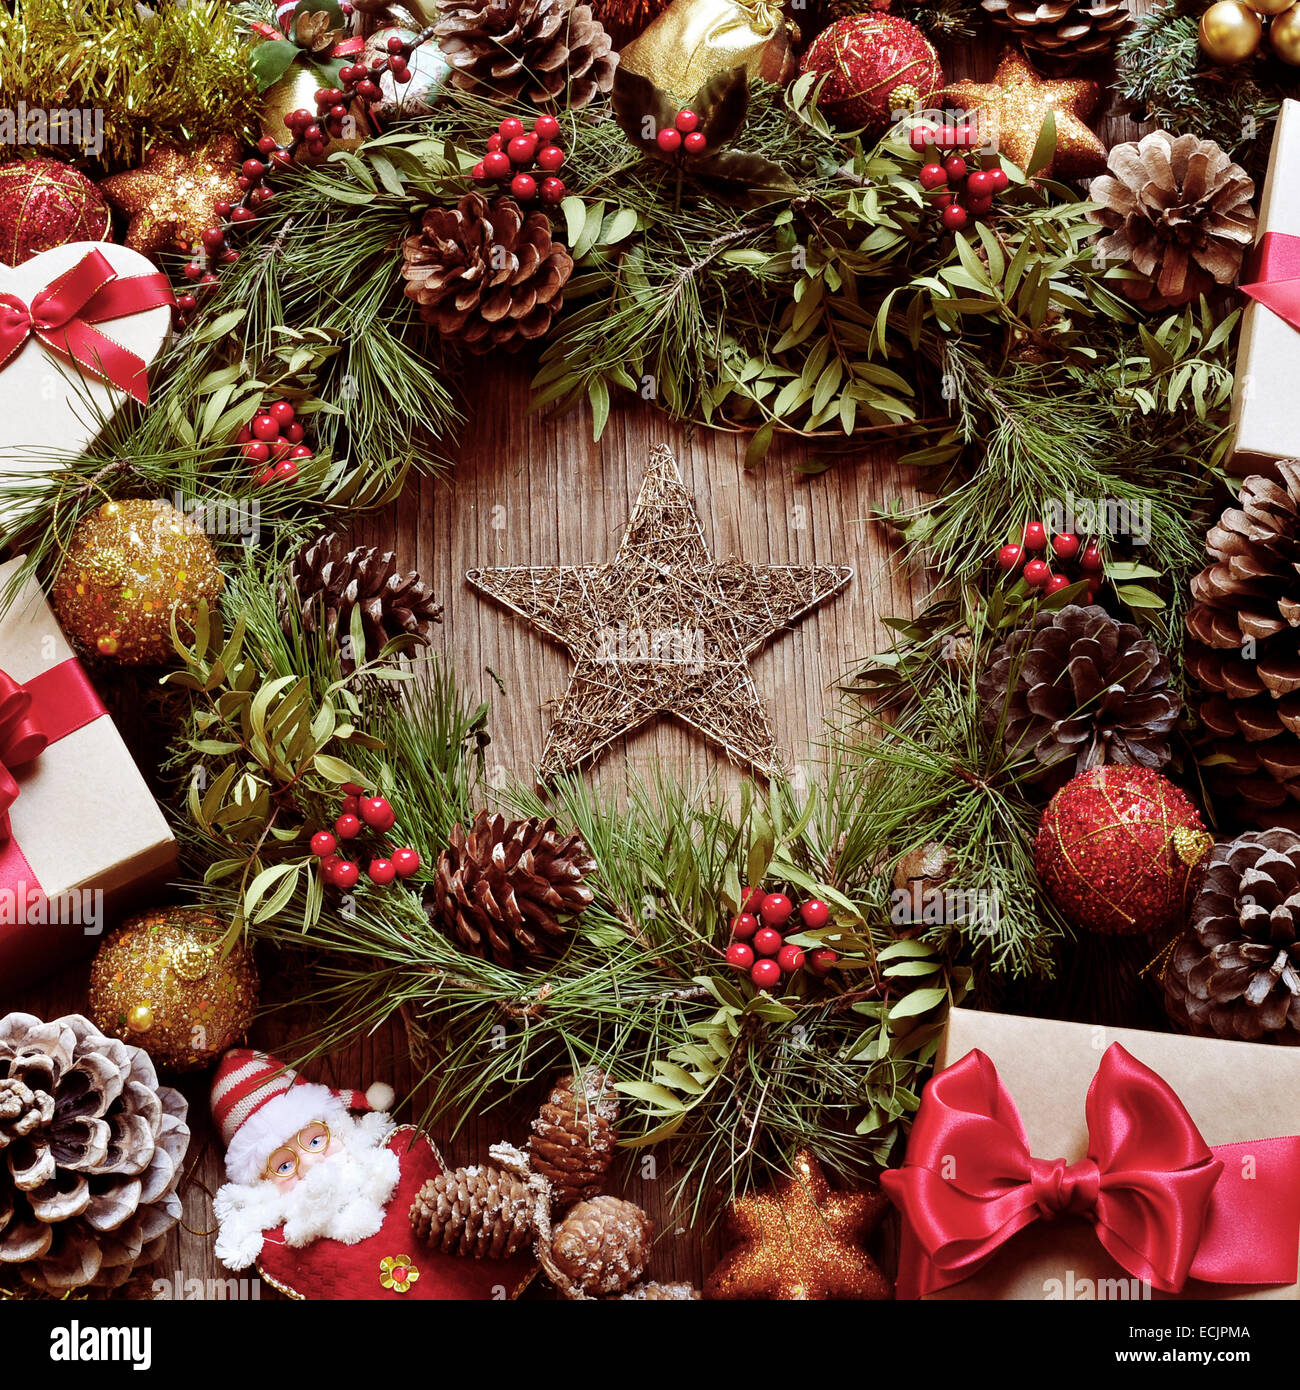 a rustic wooden table full of gifts, and christmas ornaments, such as a natural wreath with branches, berries and pine cones, or Stock Photo